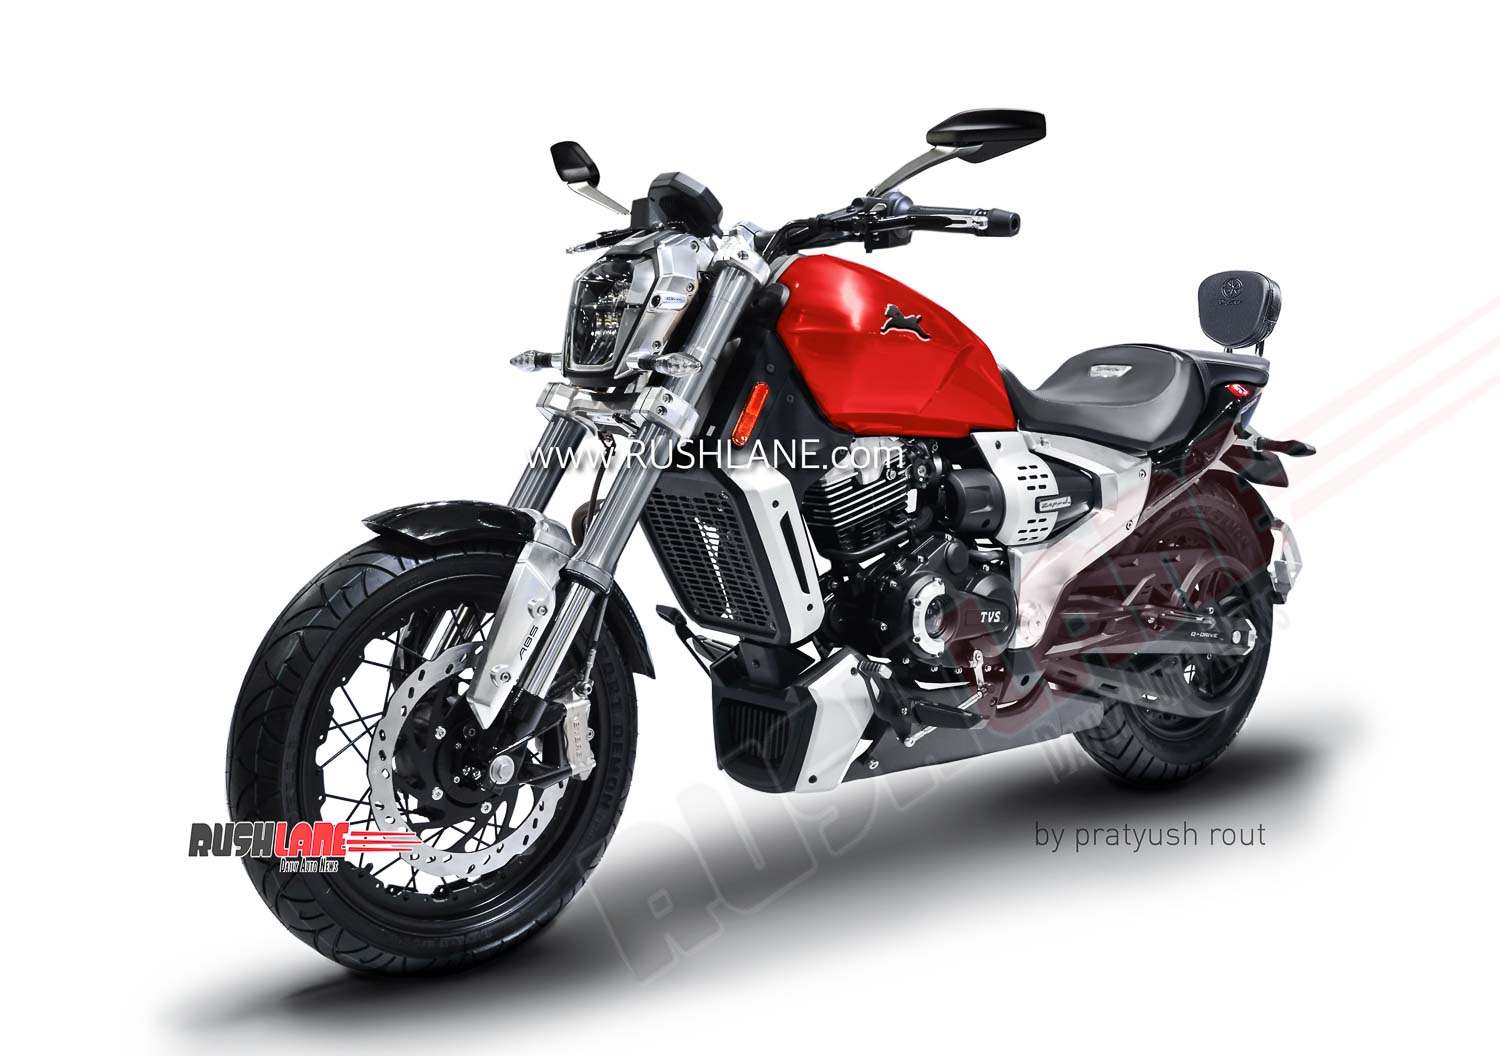 New TVS BMW motorcycle confirmed – Is it Zeppelin cruiser to rival Royal  Enfield ? | newskube